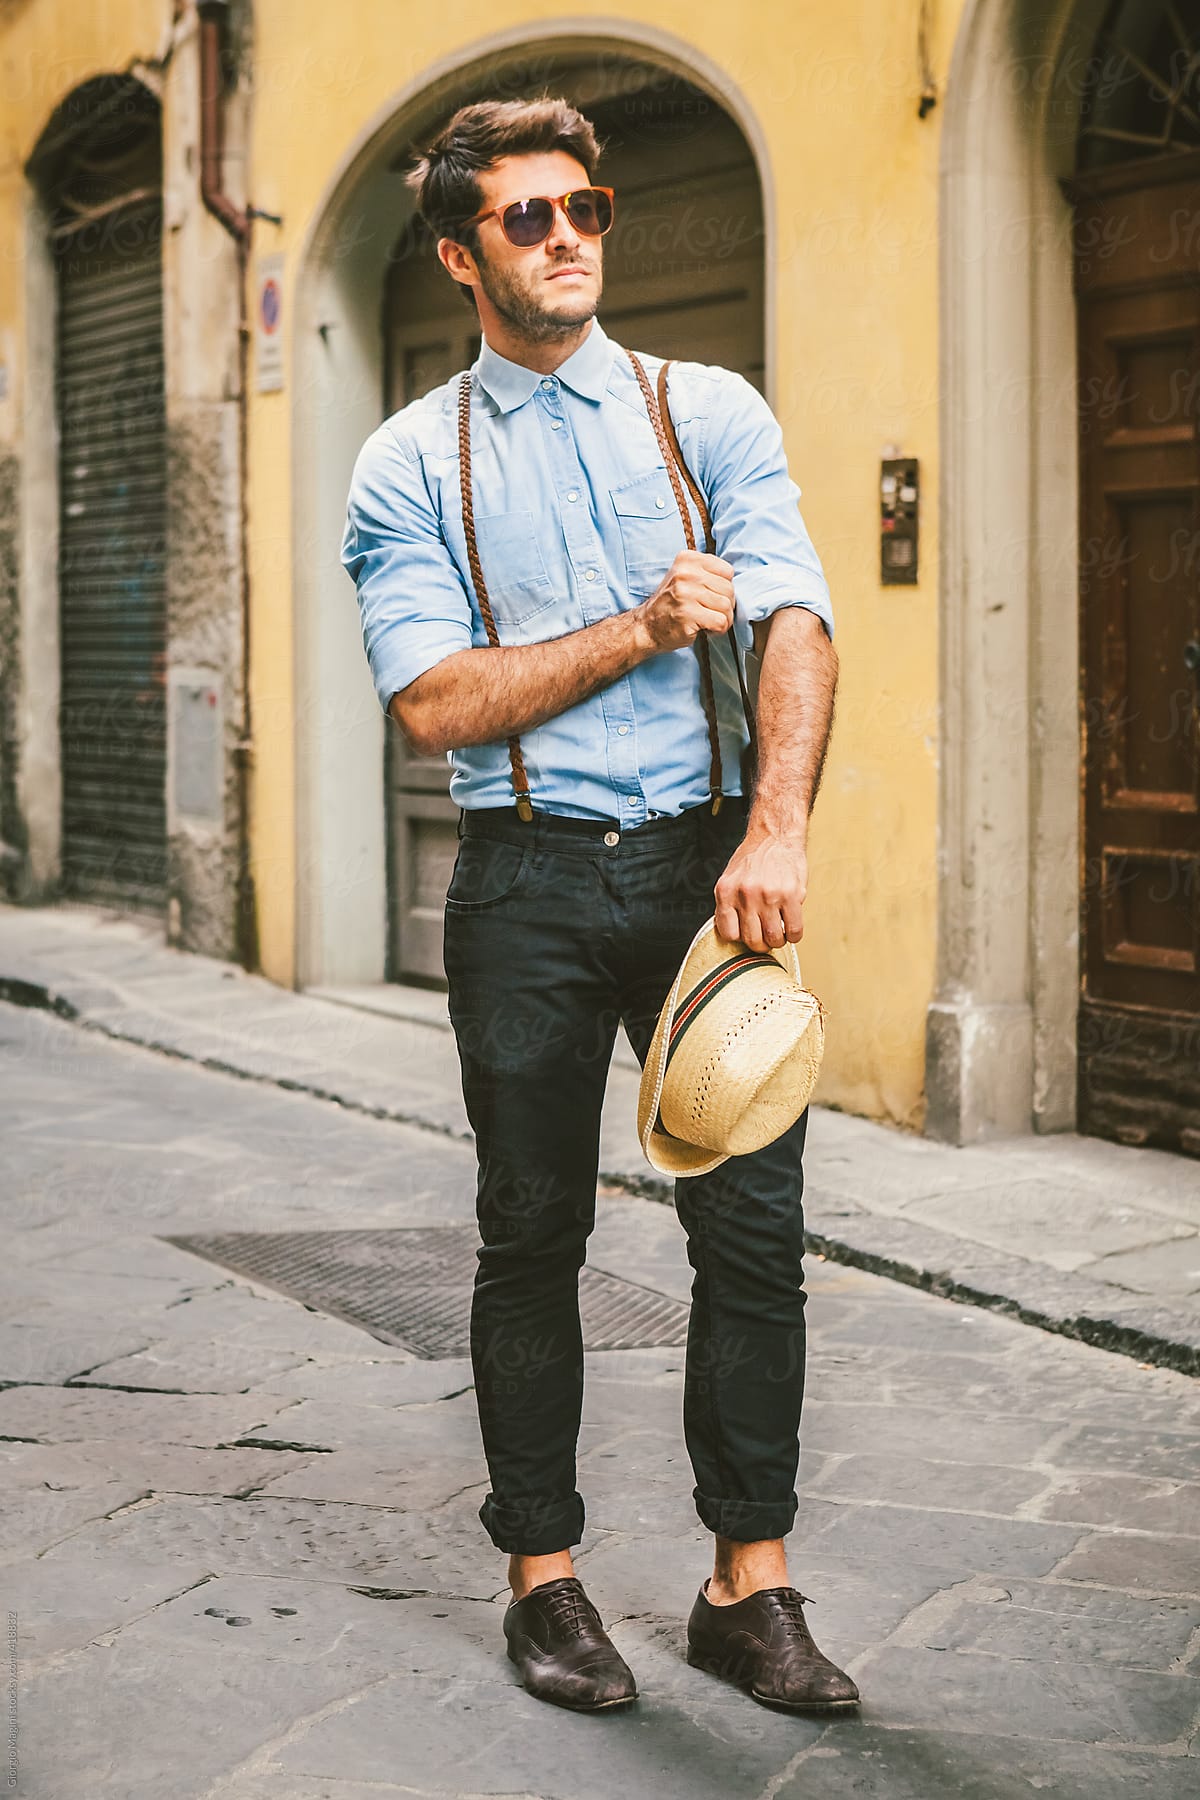 Handsome Man with a Vintage Denim Shirt Exploring an Old Italian Town